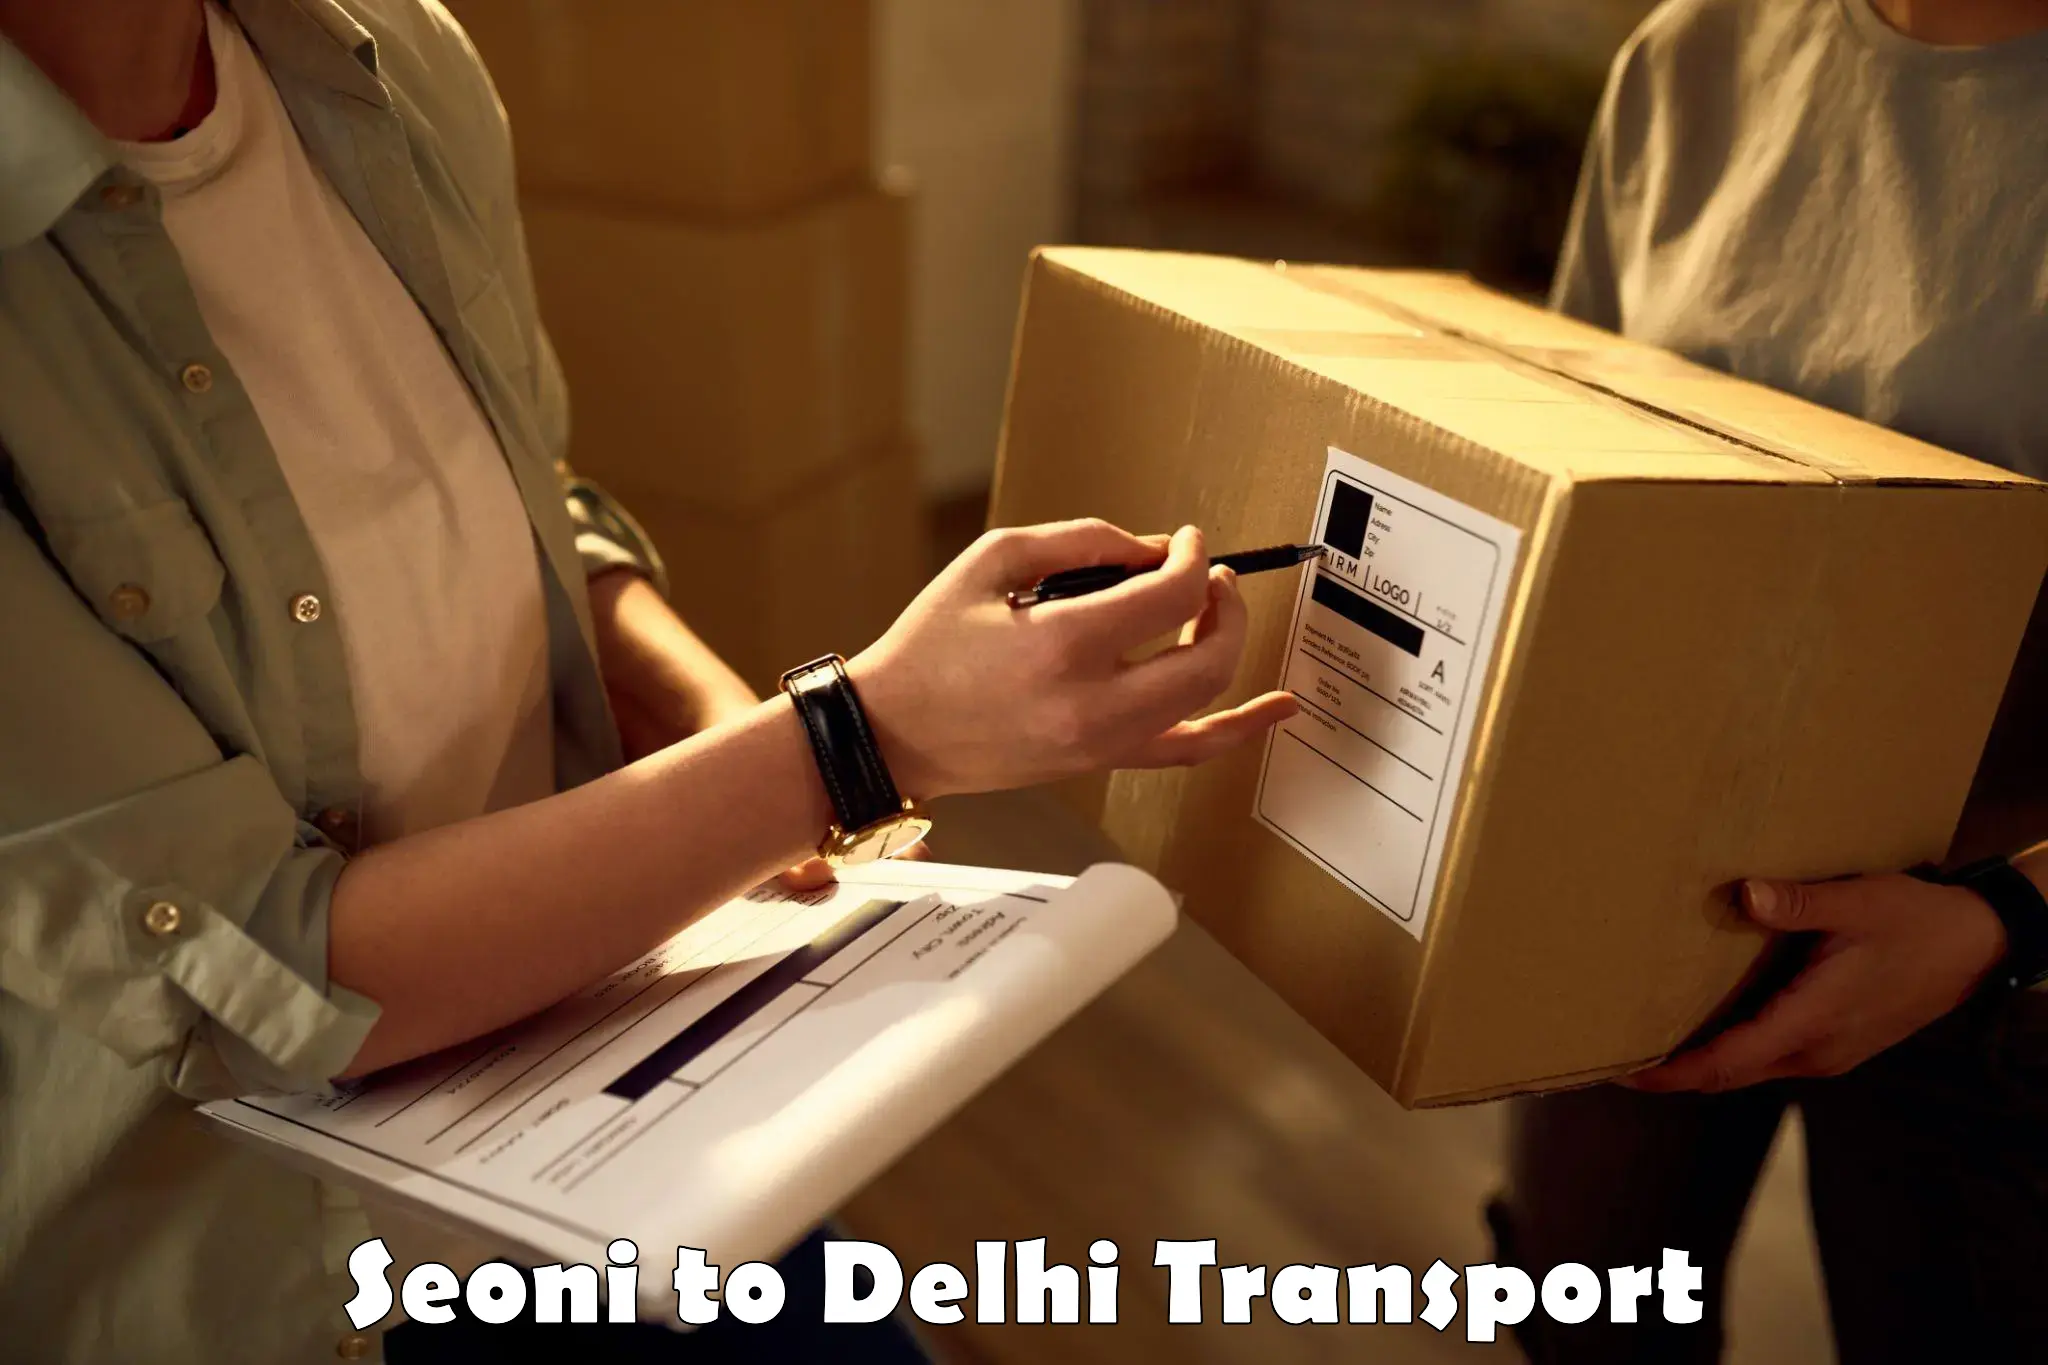 Transport bike from one state to another Seoni to NCR